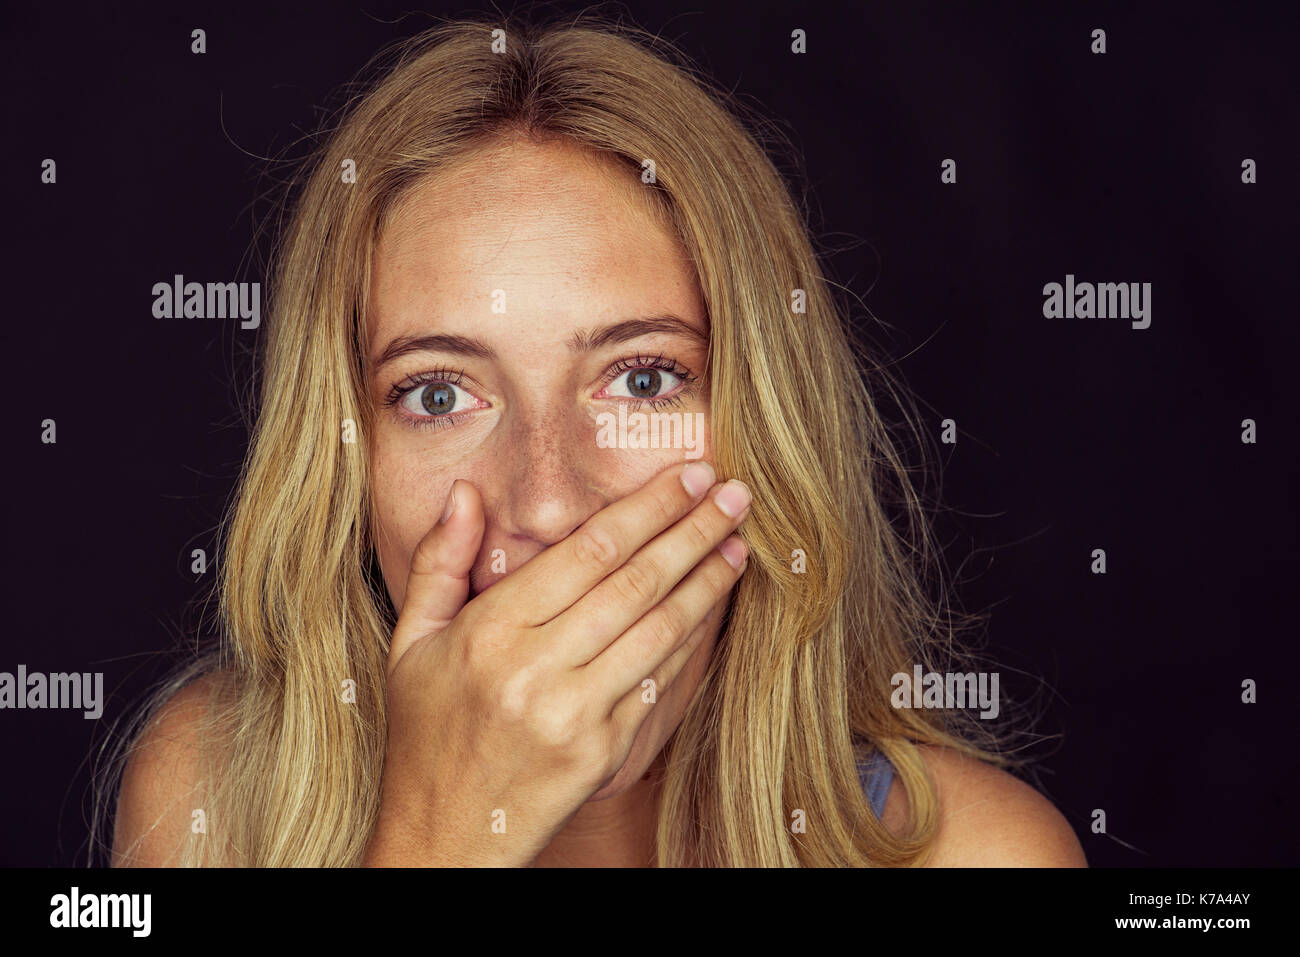 Young woman with wide eyes and hand covering mouth Stock Photo